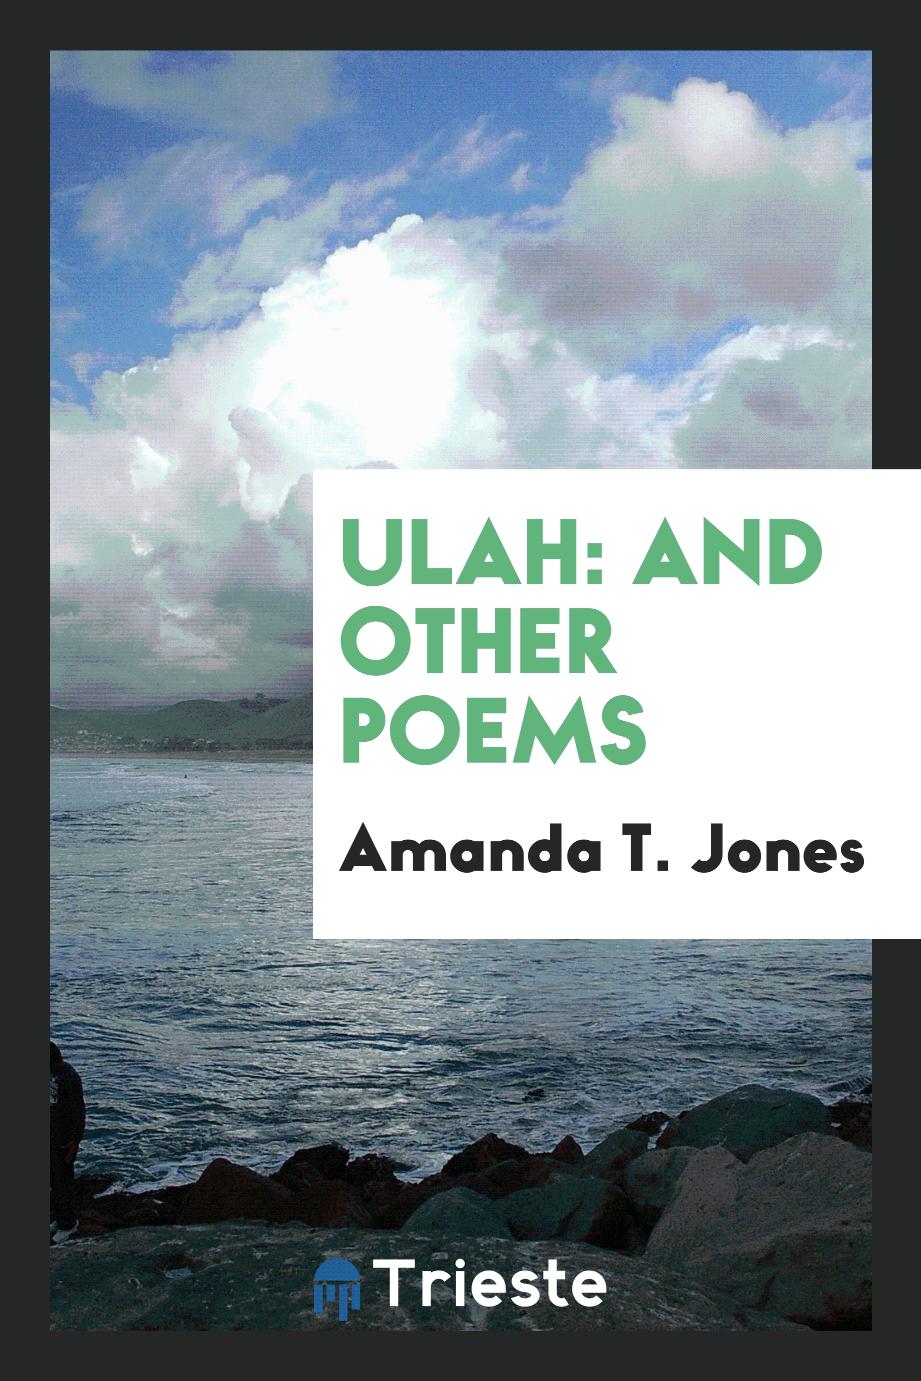 Ulah: And Other Poems